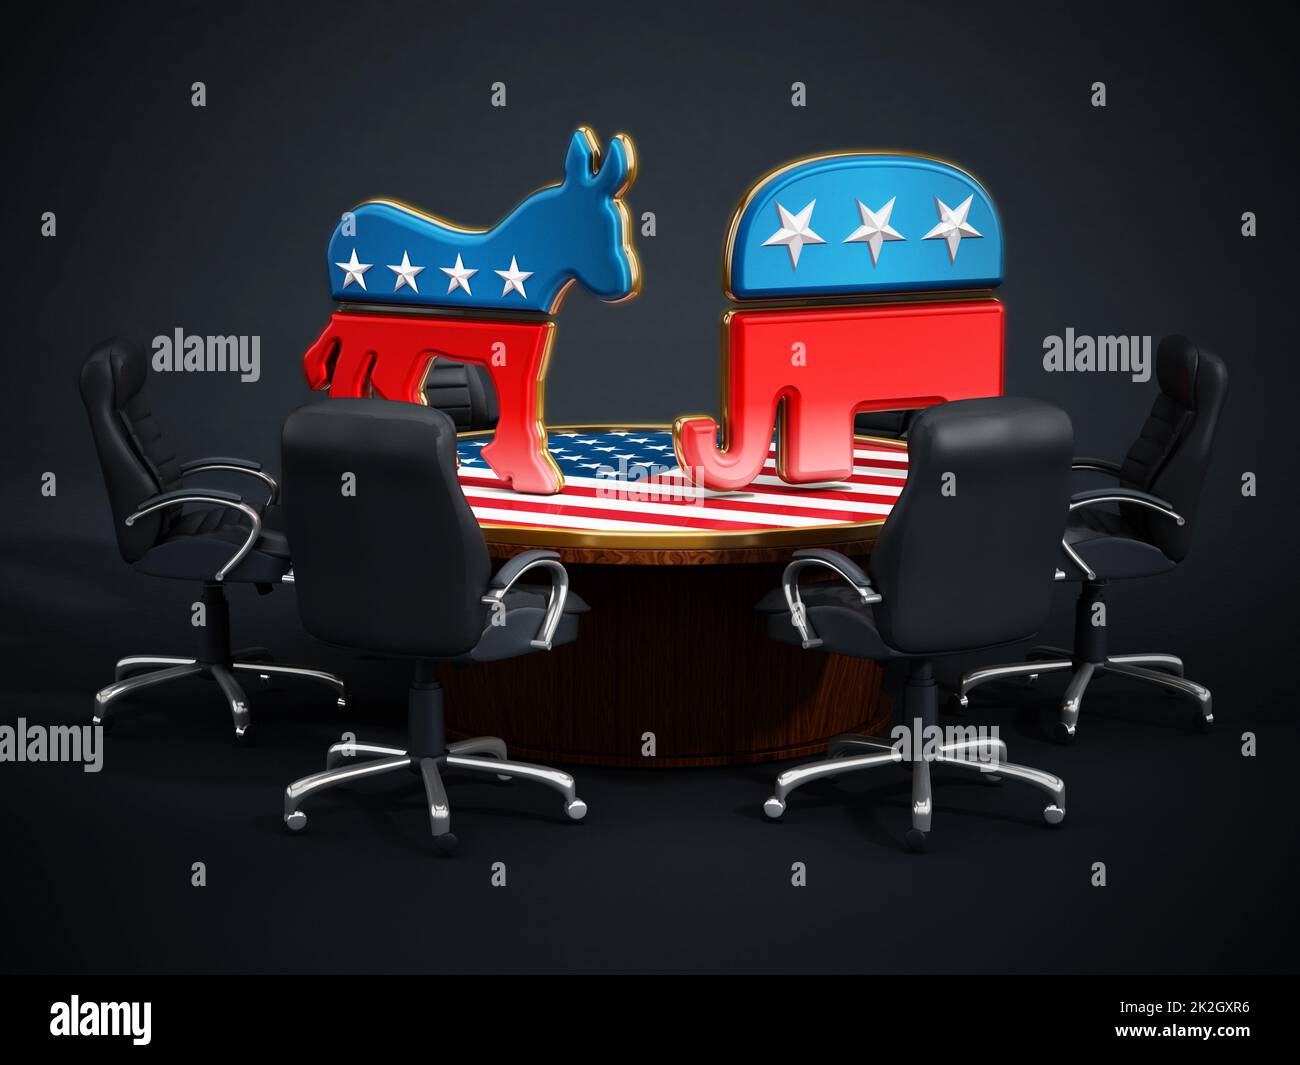 USA Political party symbols standing on American flag covered table Stock Photo